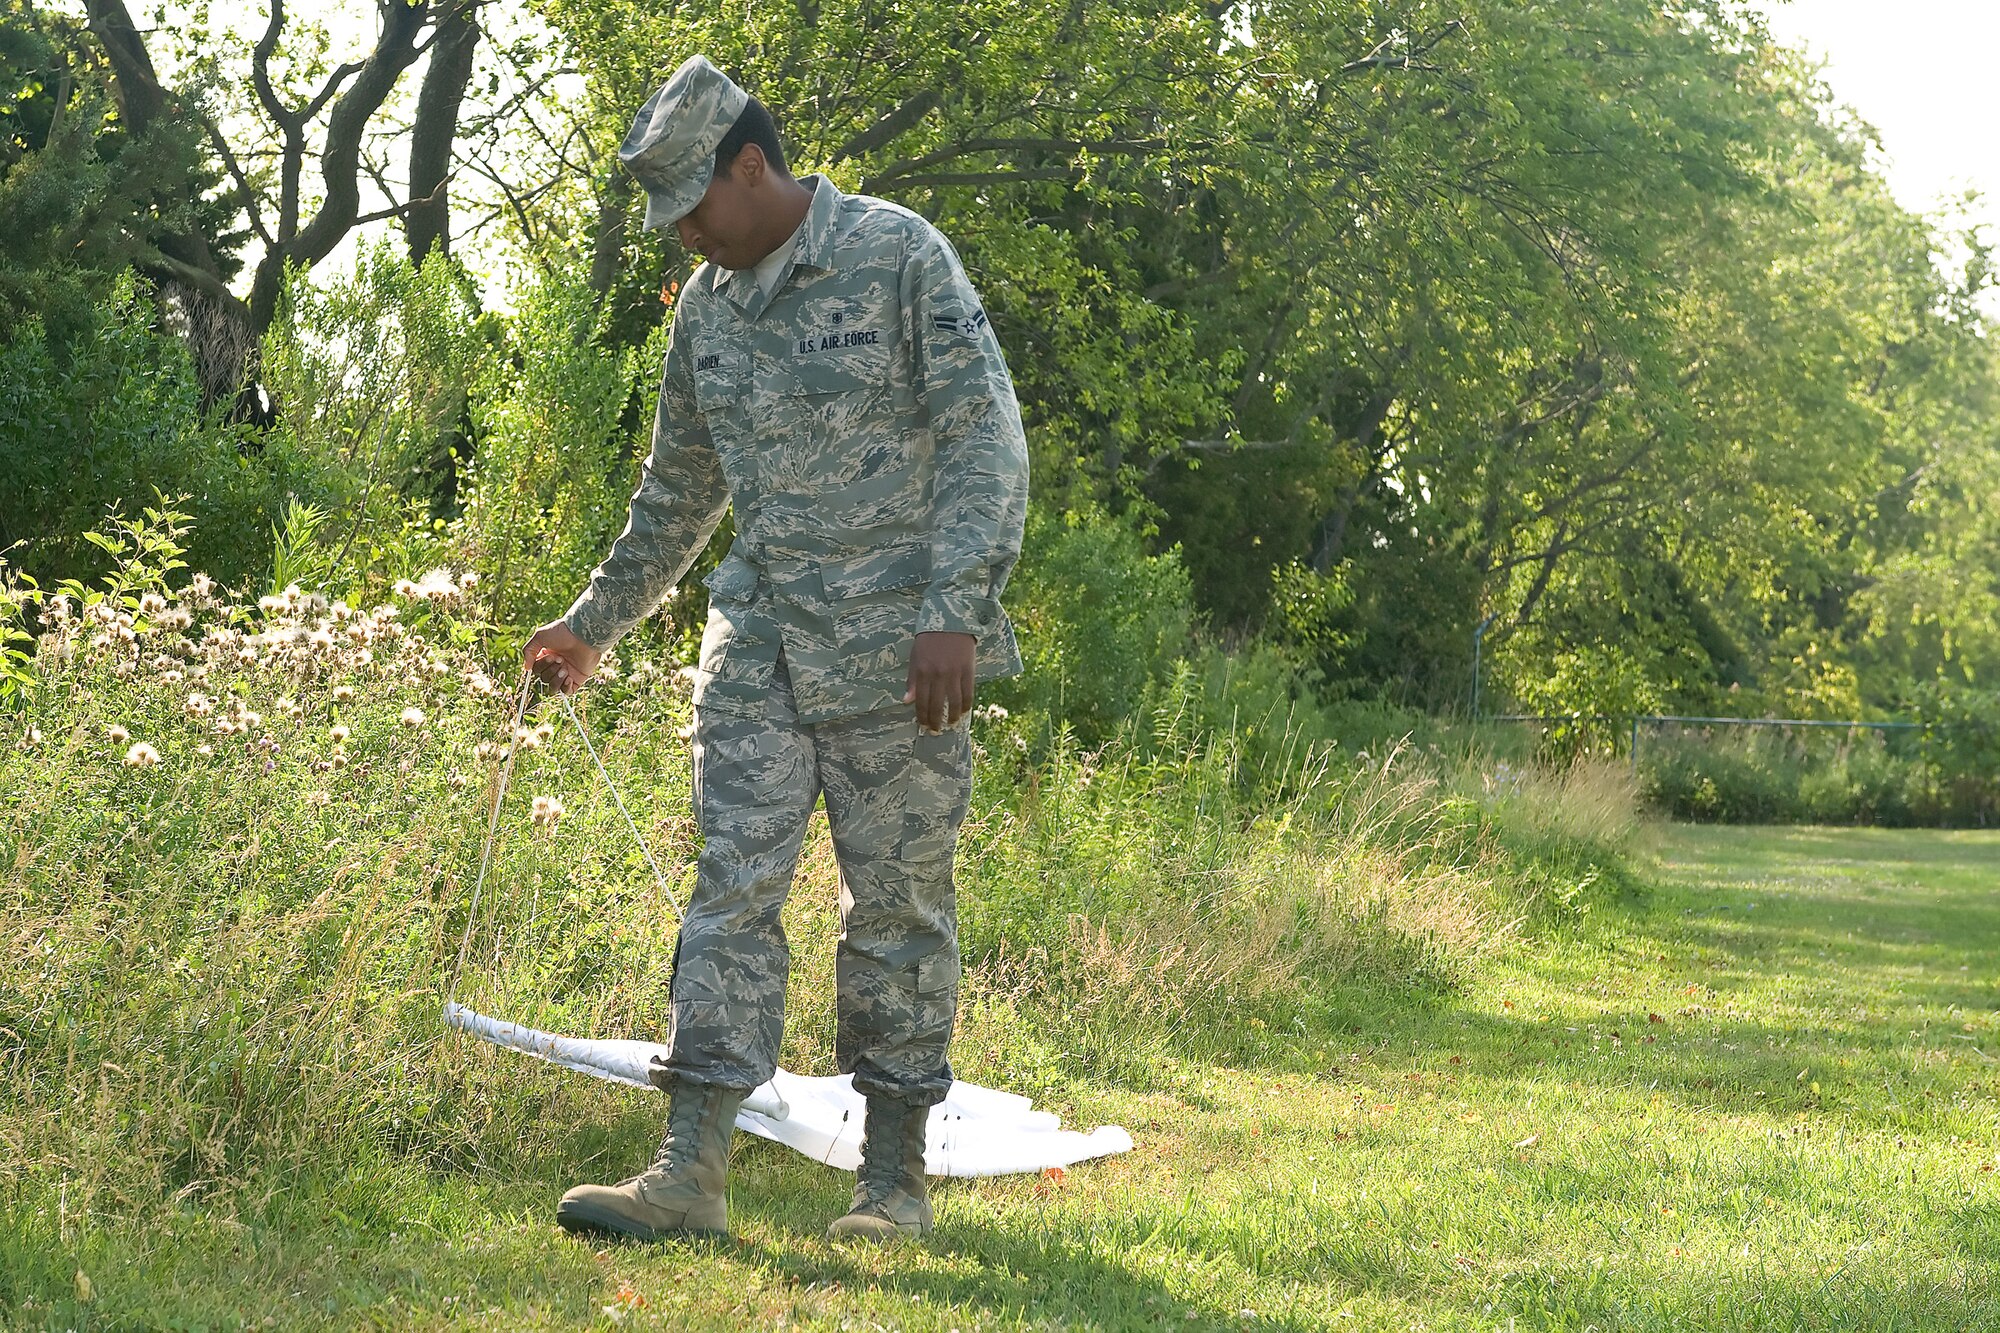 Airman 1st Class Delvin Darien, 436th Aerospace Medicine Squadron Public Health Flight Technician, runs a piece of cloth along a grassy area at the Eagle?s Rest Picnic Area on Dover Air Force Base, Del., June 30, 2010. Darien uses this method of tick-hunting to trap the critter to test for lyme disease. (U.S. Air Force photo by Roland Balik/Released)